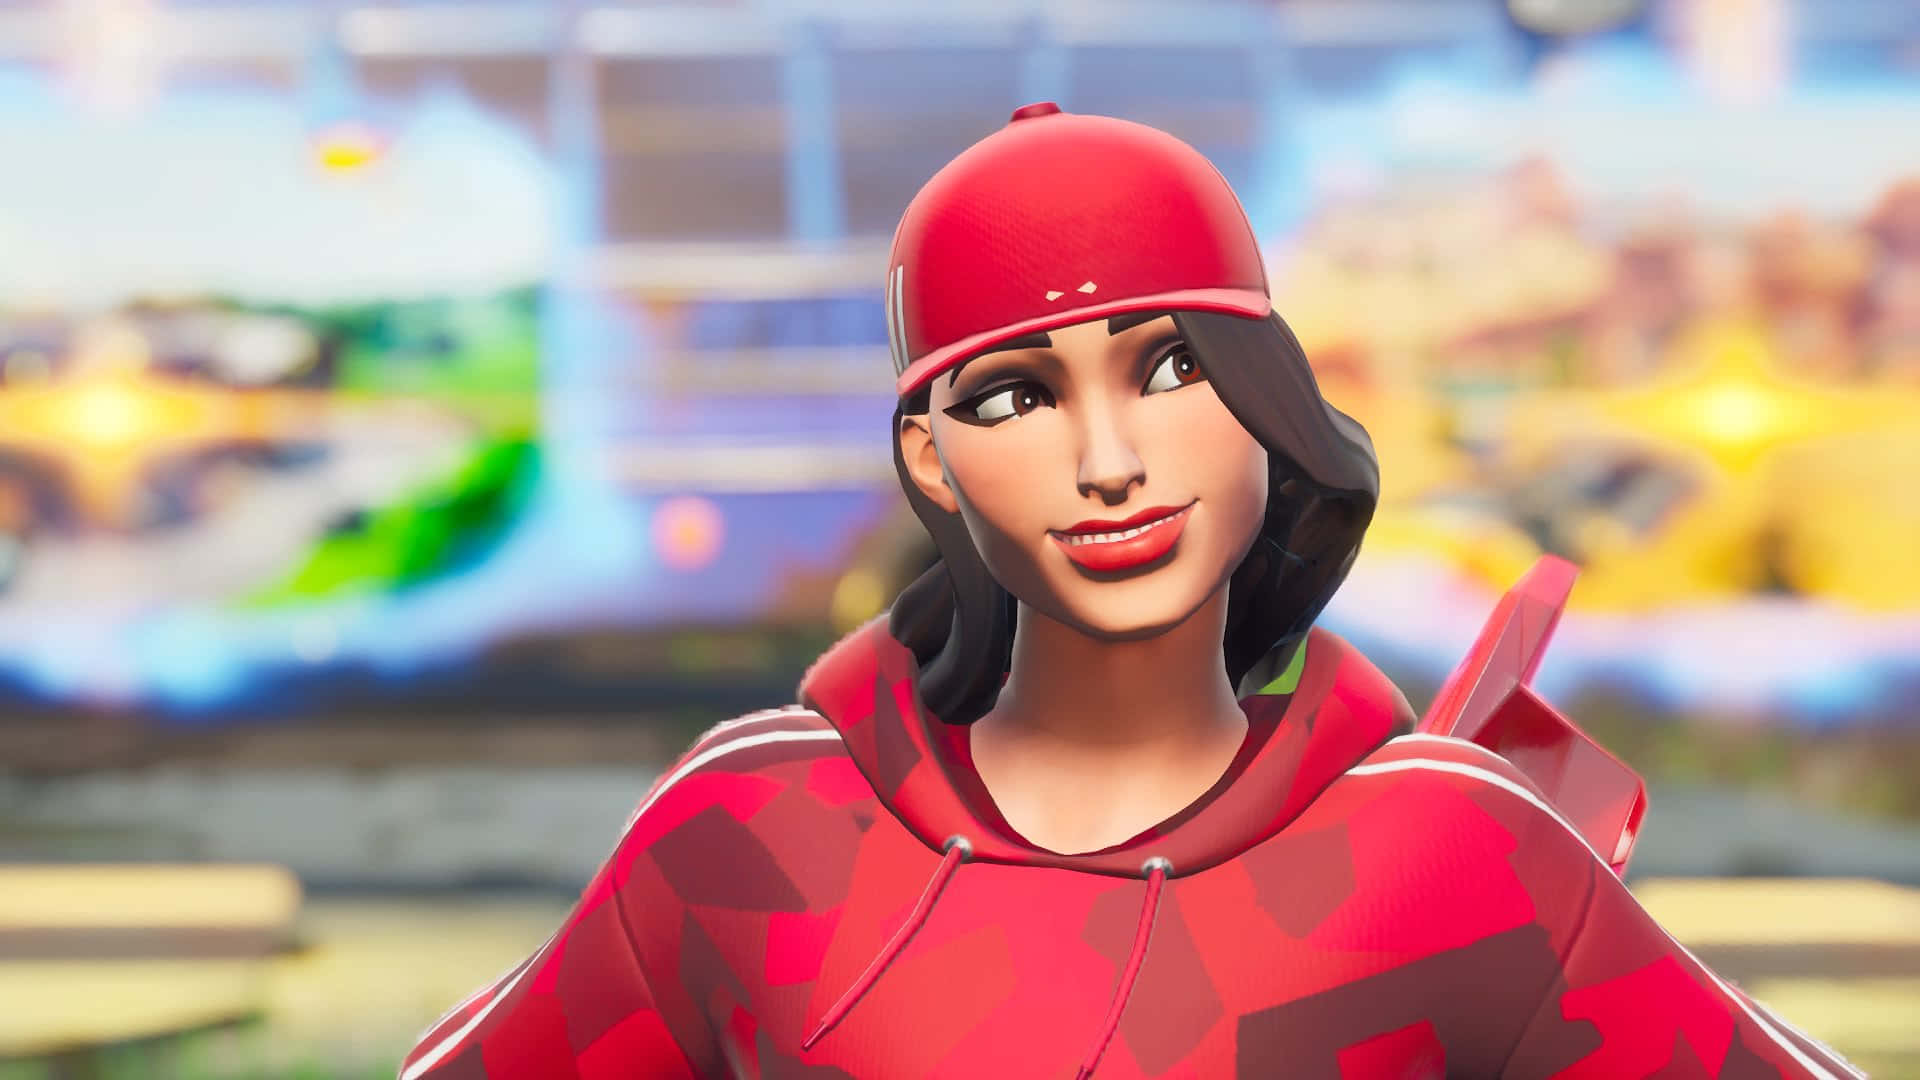 Get Ready to Strike with the Ruby Fortnite Skin Wallpaper